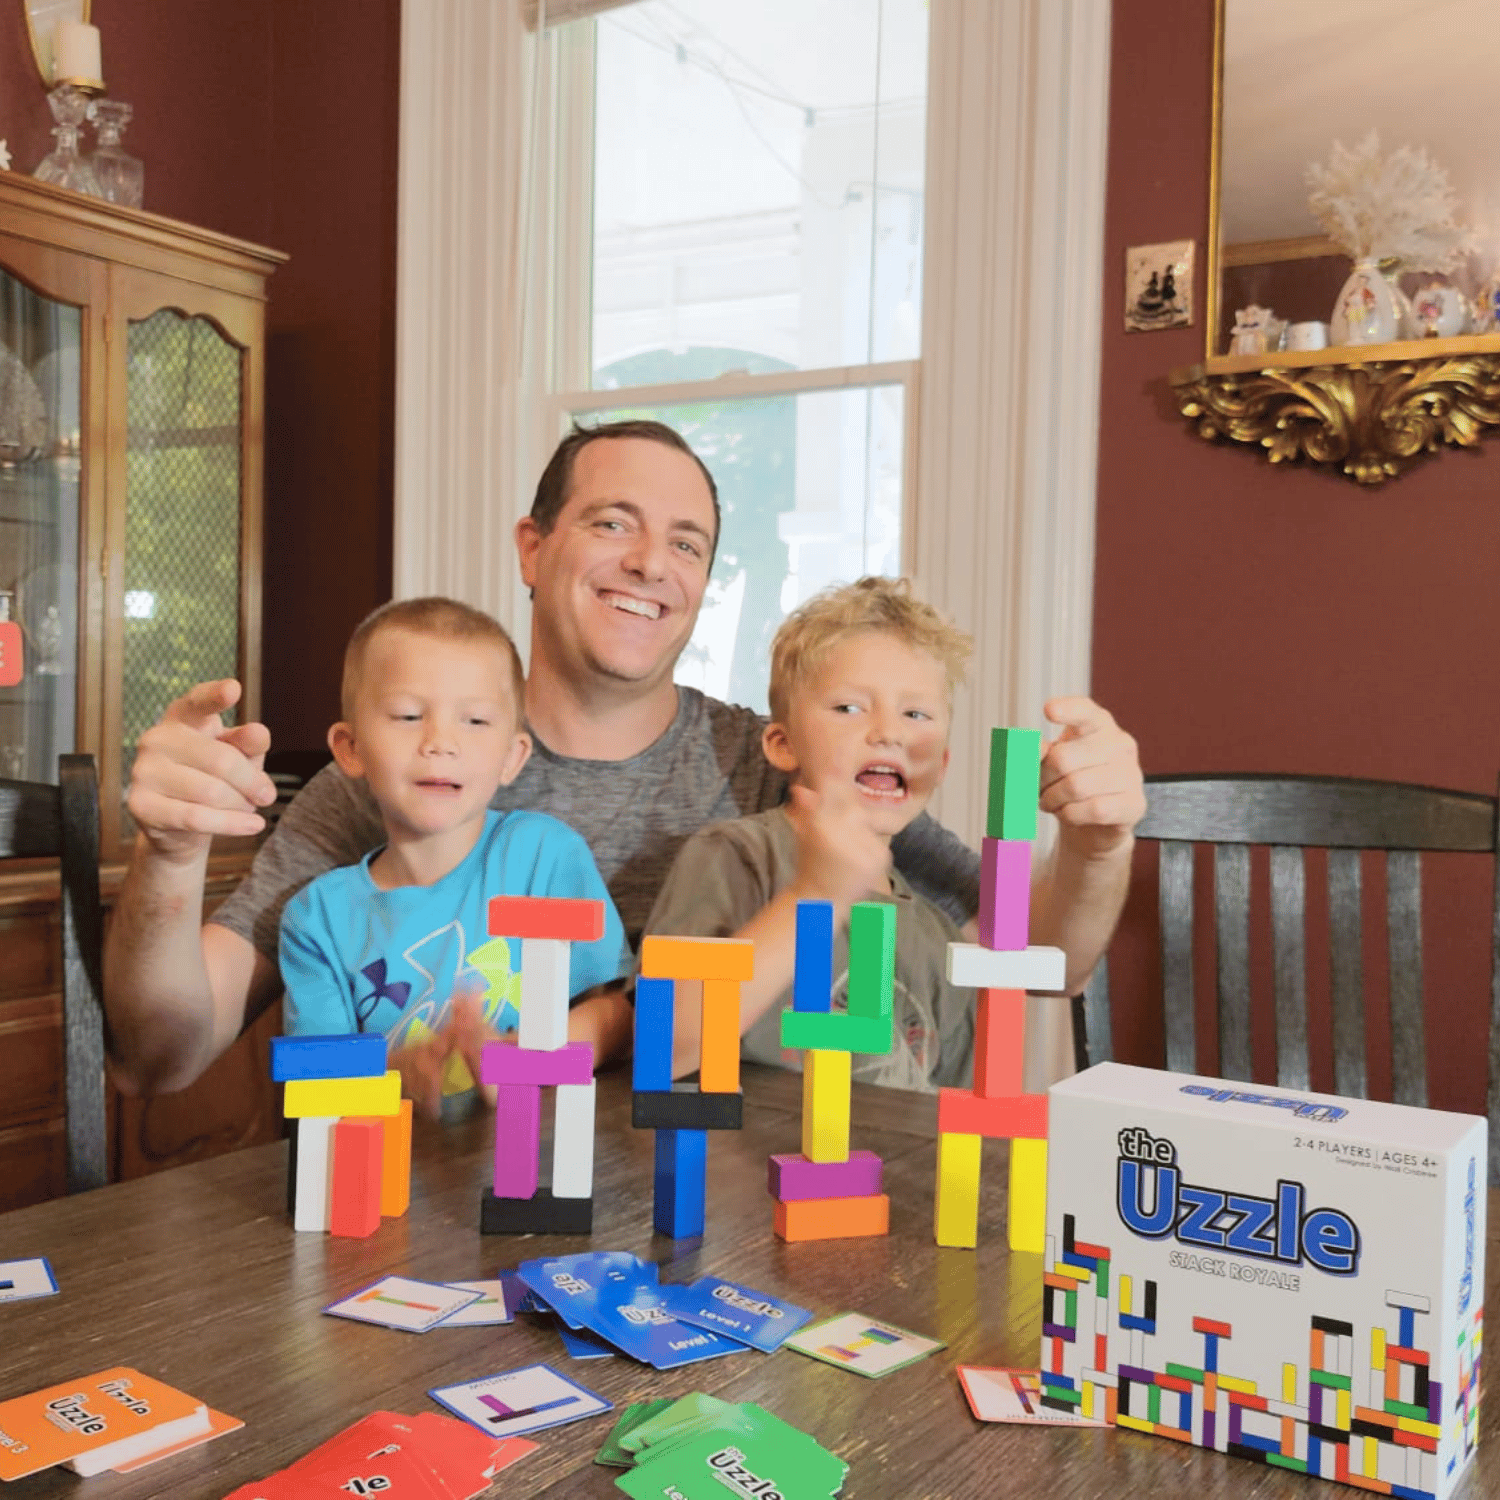 The Uzzle 2.0 Board Game for Family, Kids, Teens and Adults